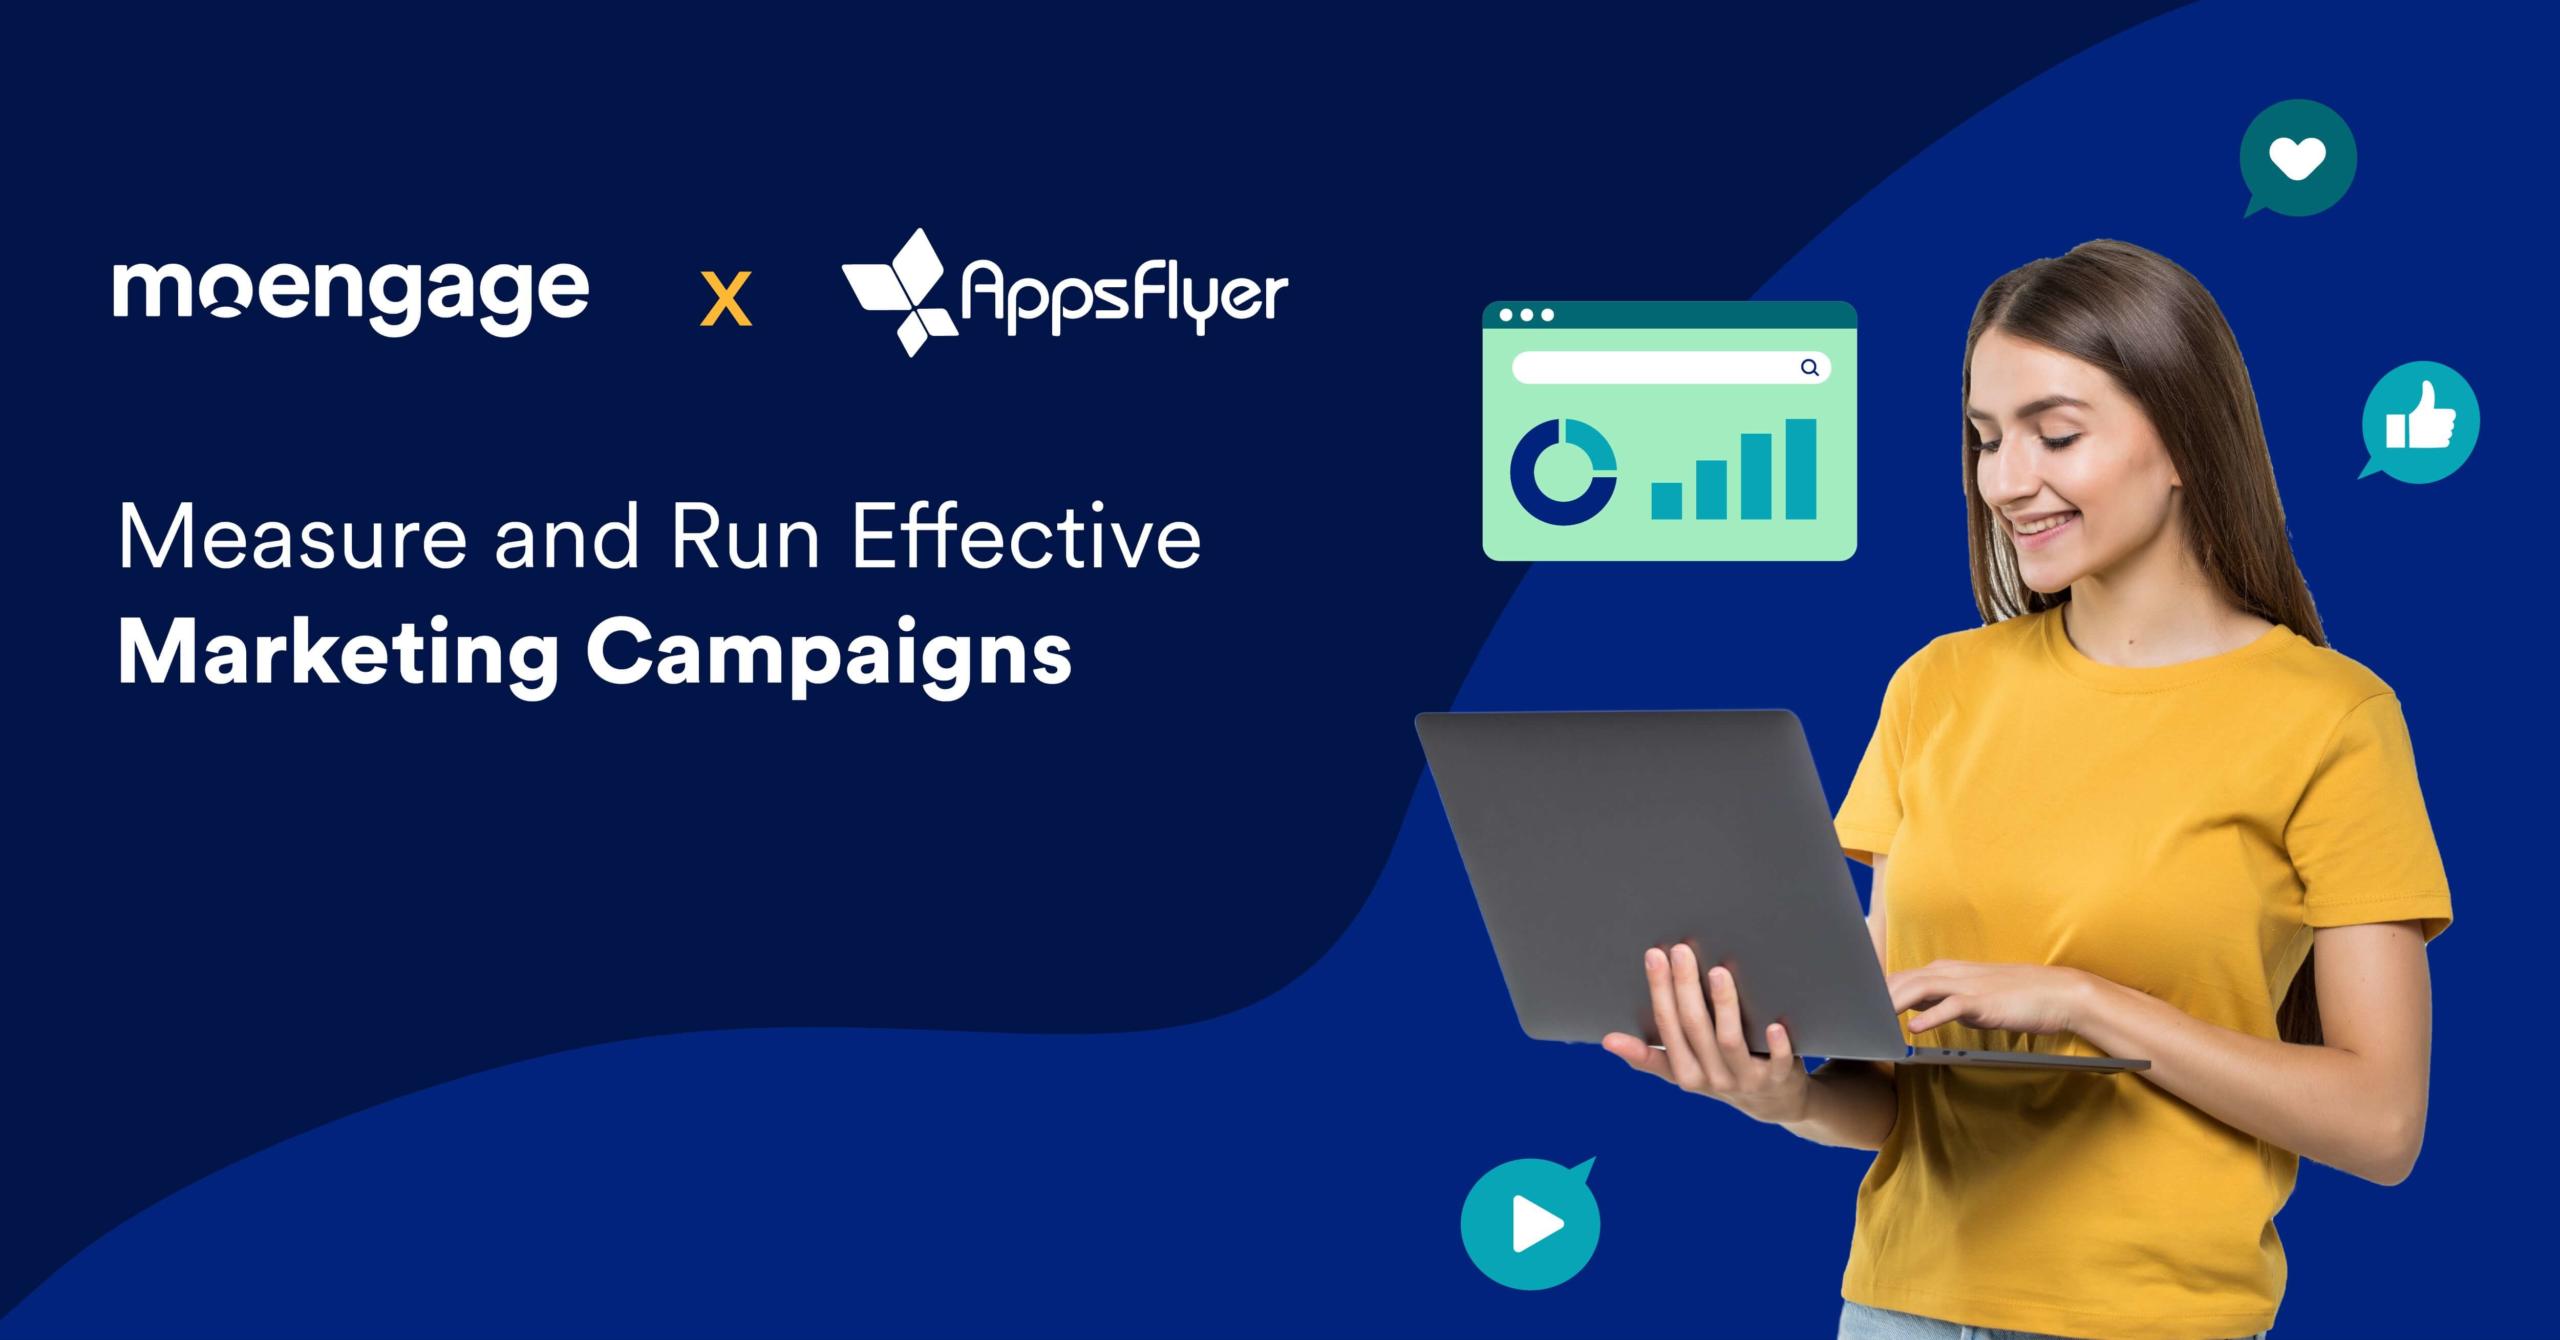 Measure and Run Effective Marketing Campaigns using AppsFlyer and MoEngage